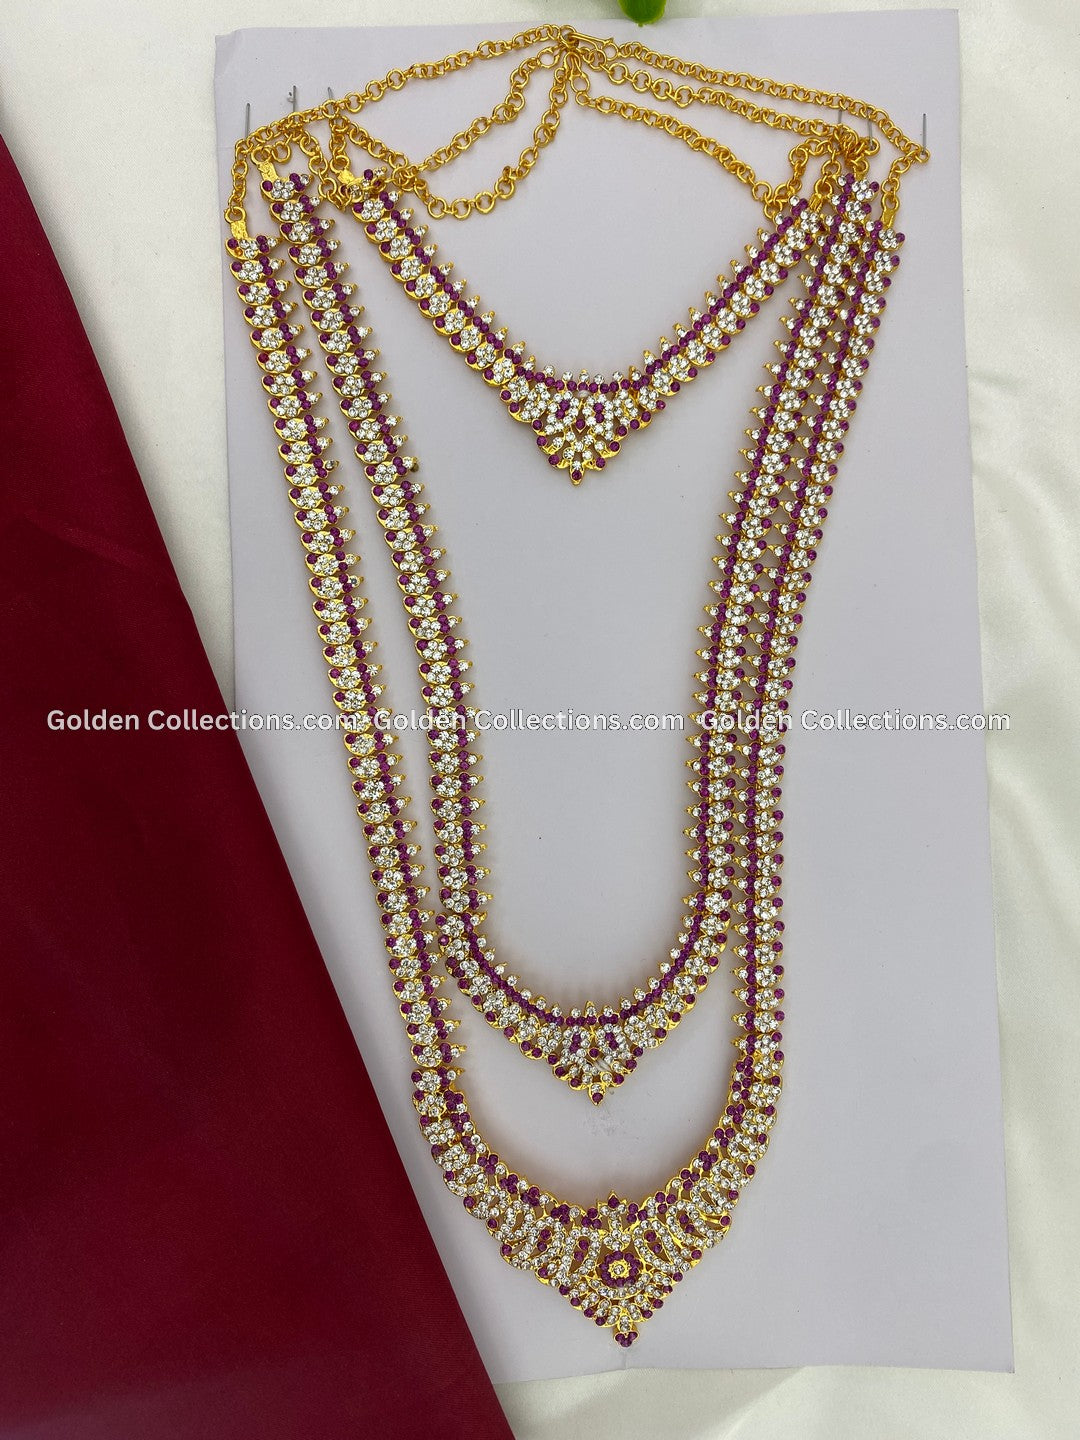 Sacred Goddess Lakshmi Jewellery Collection - GoldenCollections